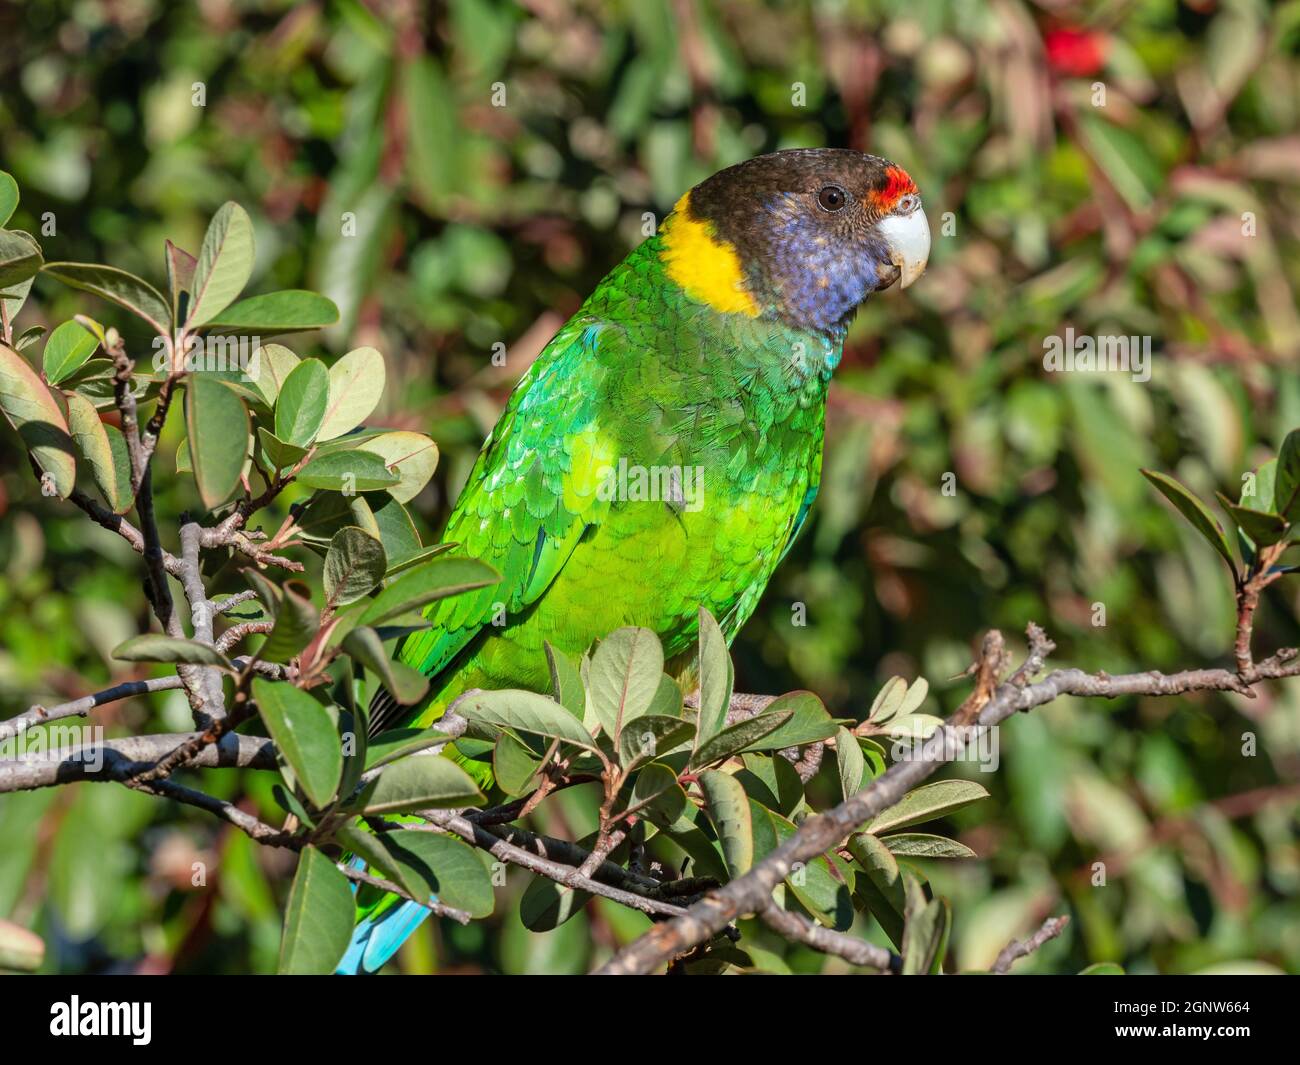 An Australian Ringneck of the western race, known as the Twenty-eight Parrot, photographed in a forest of southwestern Australia. Stock Photo